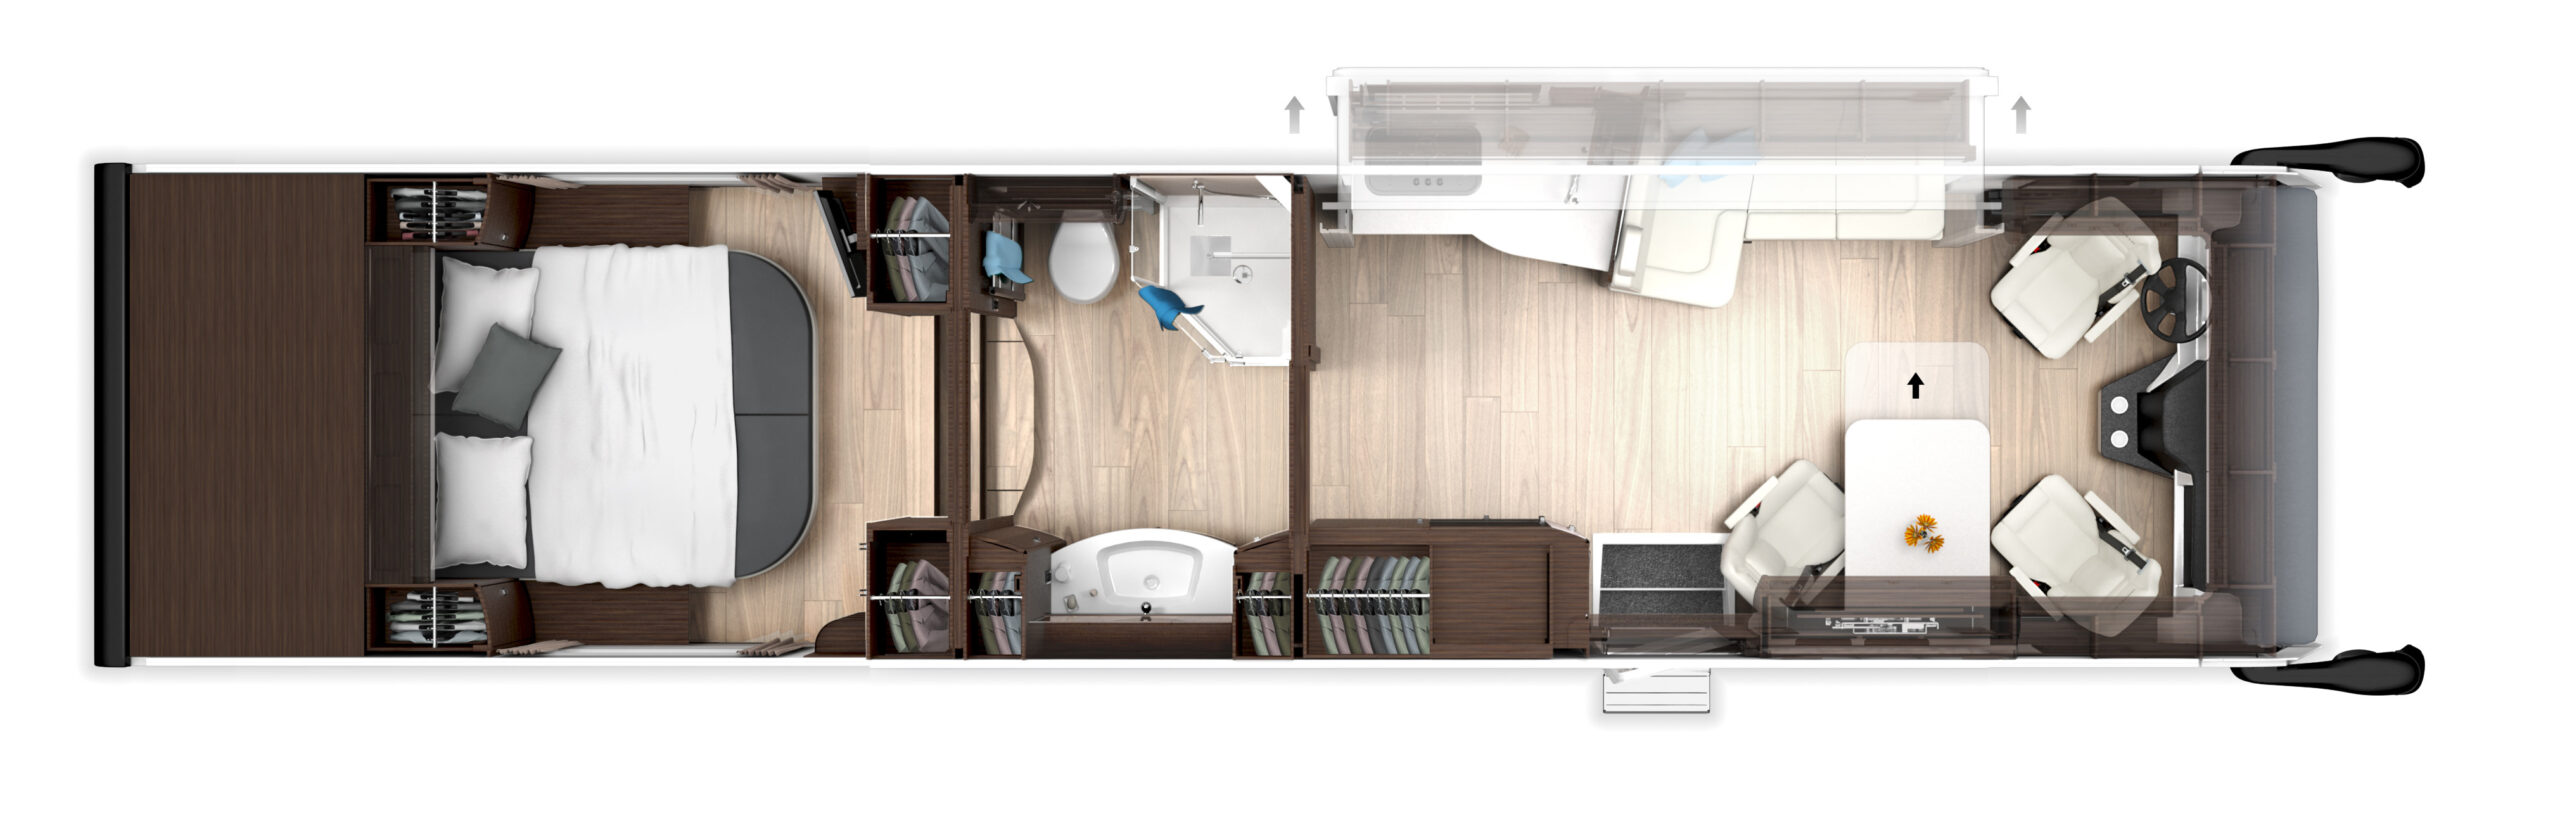 WEISS+WEISS-Reisemobile_morelo_empire_liner_119GSO